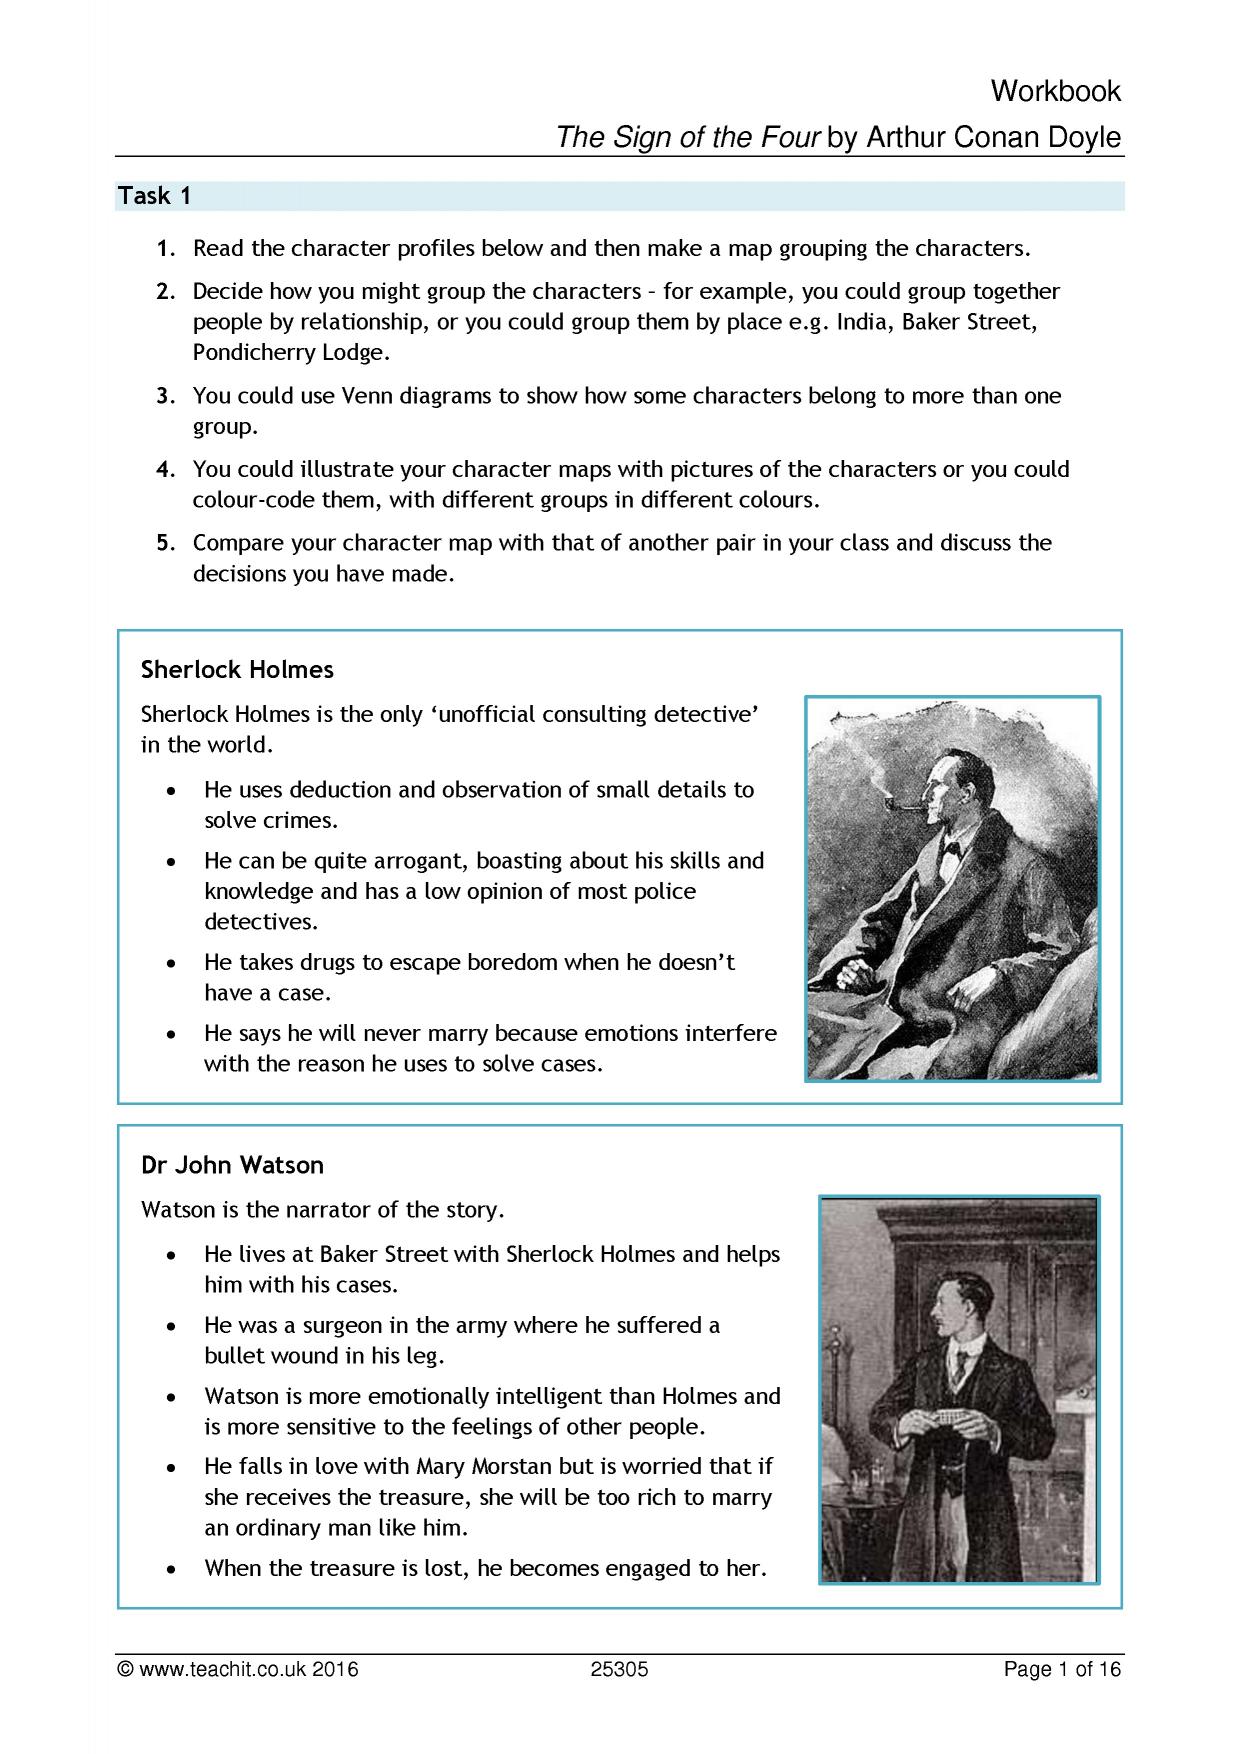 Revision workbook | The Sign of the Four | KS4 English | Teachit